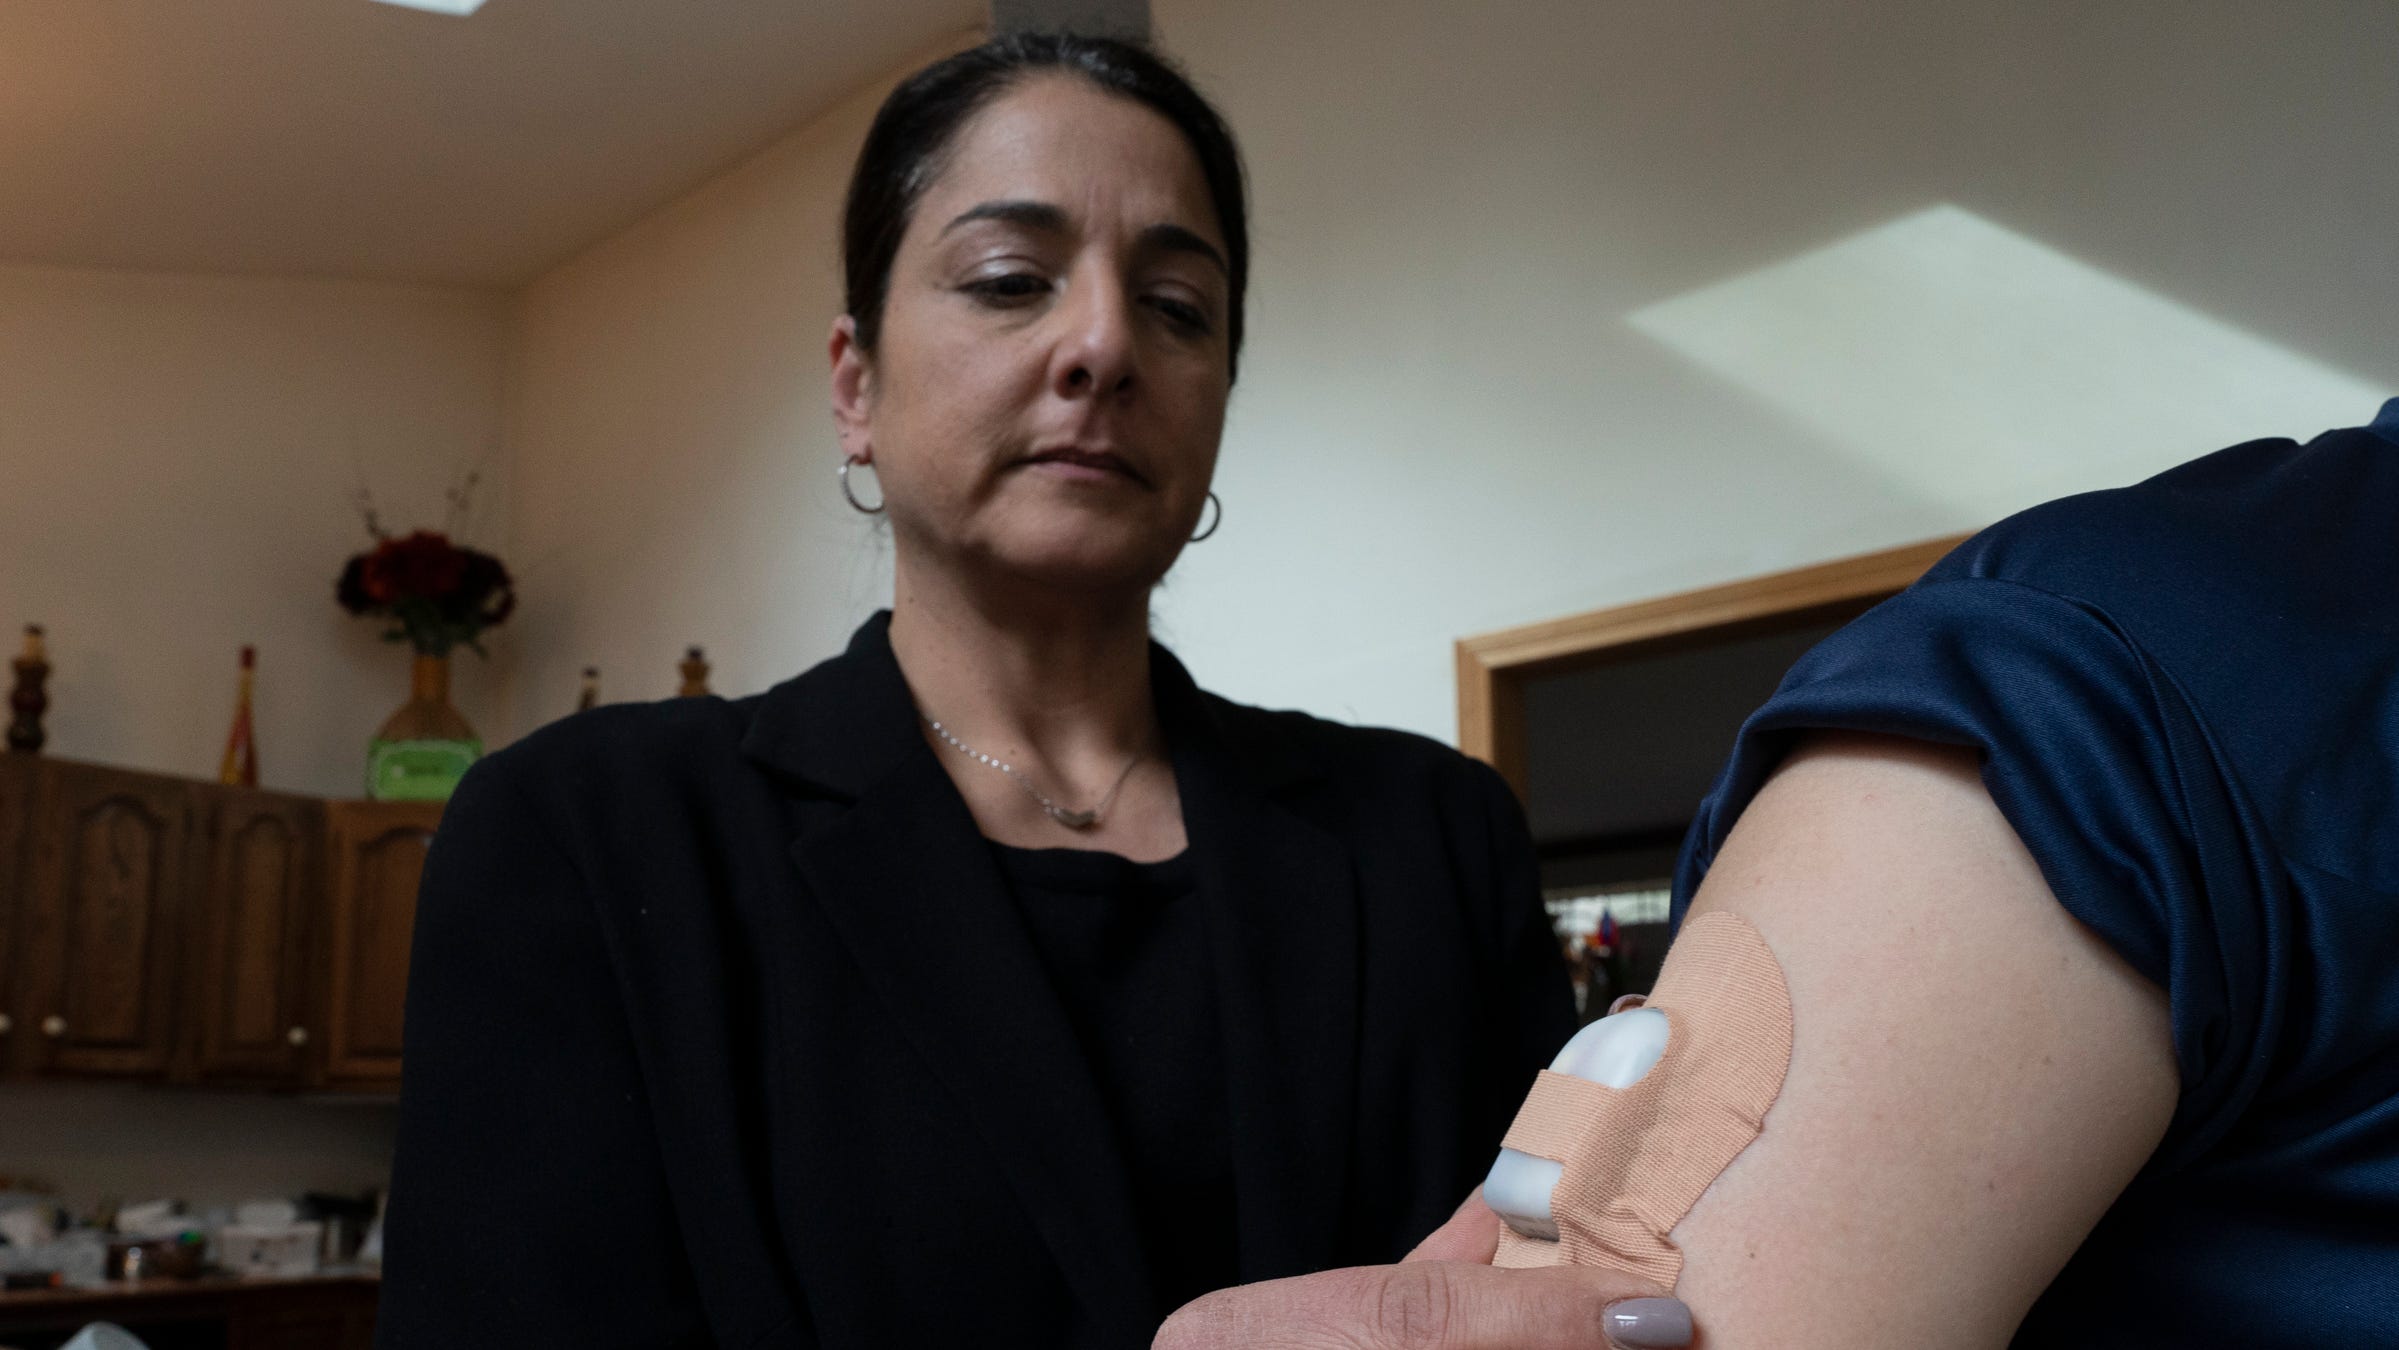 A billing dispute means a mom must pay nearly $1,000 a month for her son's diabetes care